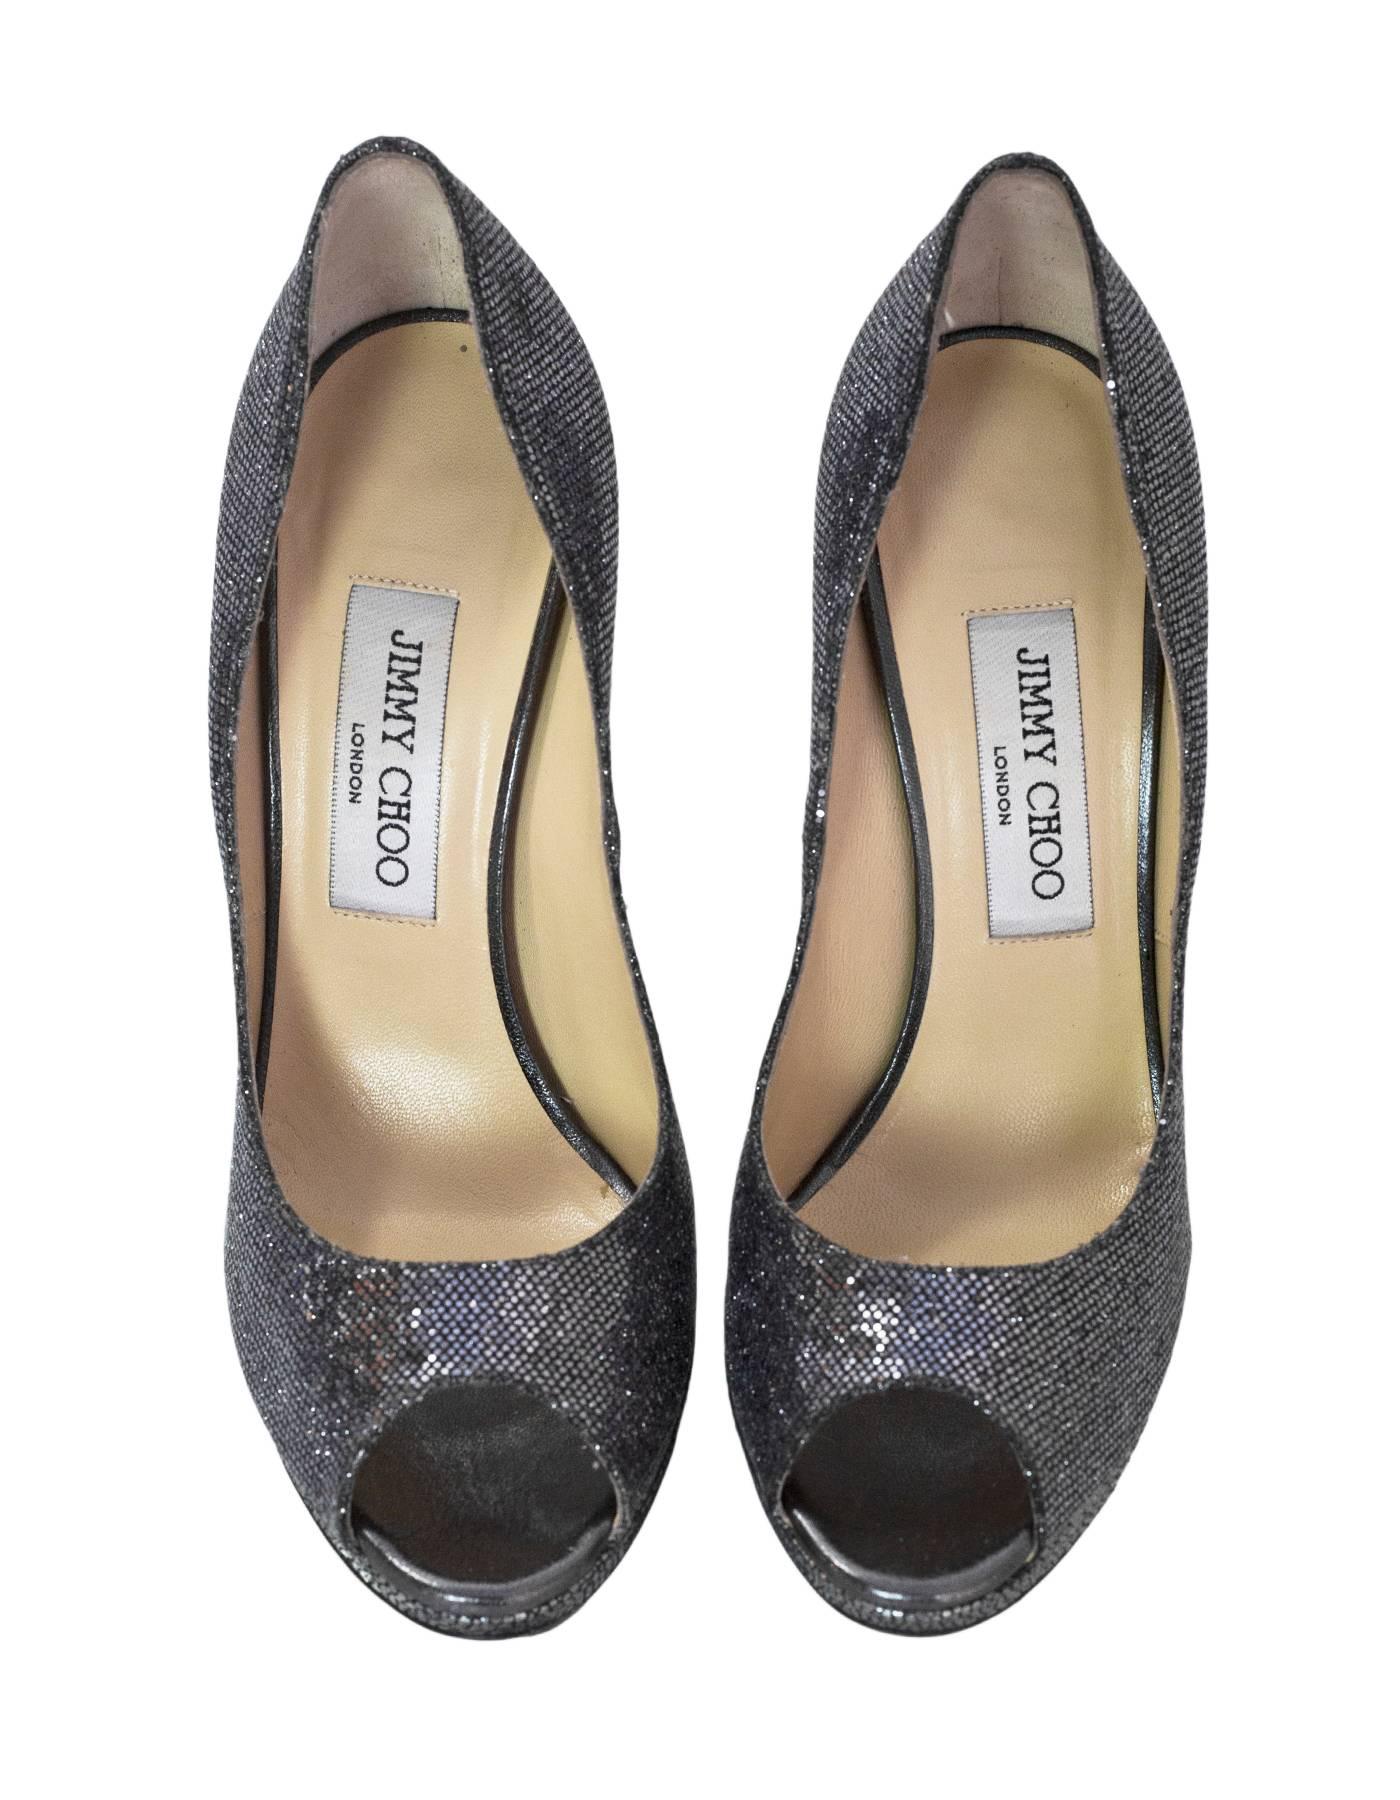 Jimmy Choo Silver Glitter Platform Peep Toe Pumps sz 37.5 In Excellent Condition In New York, NY